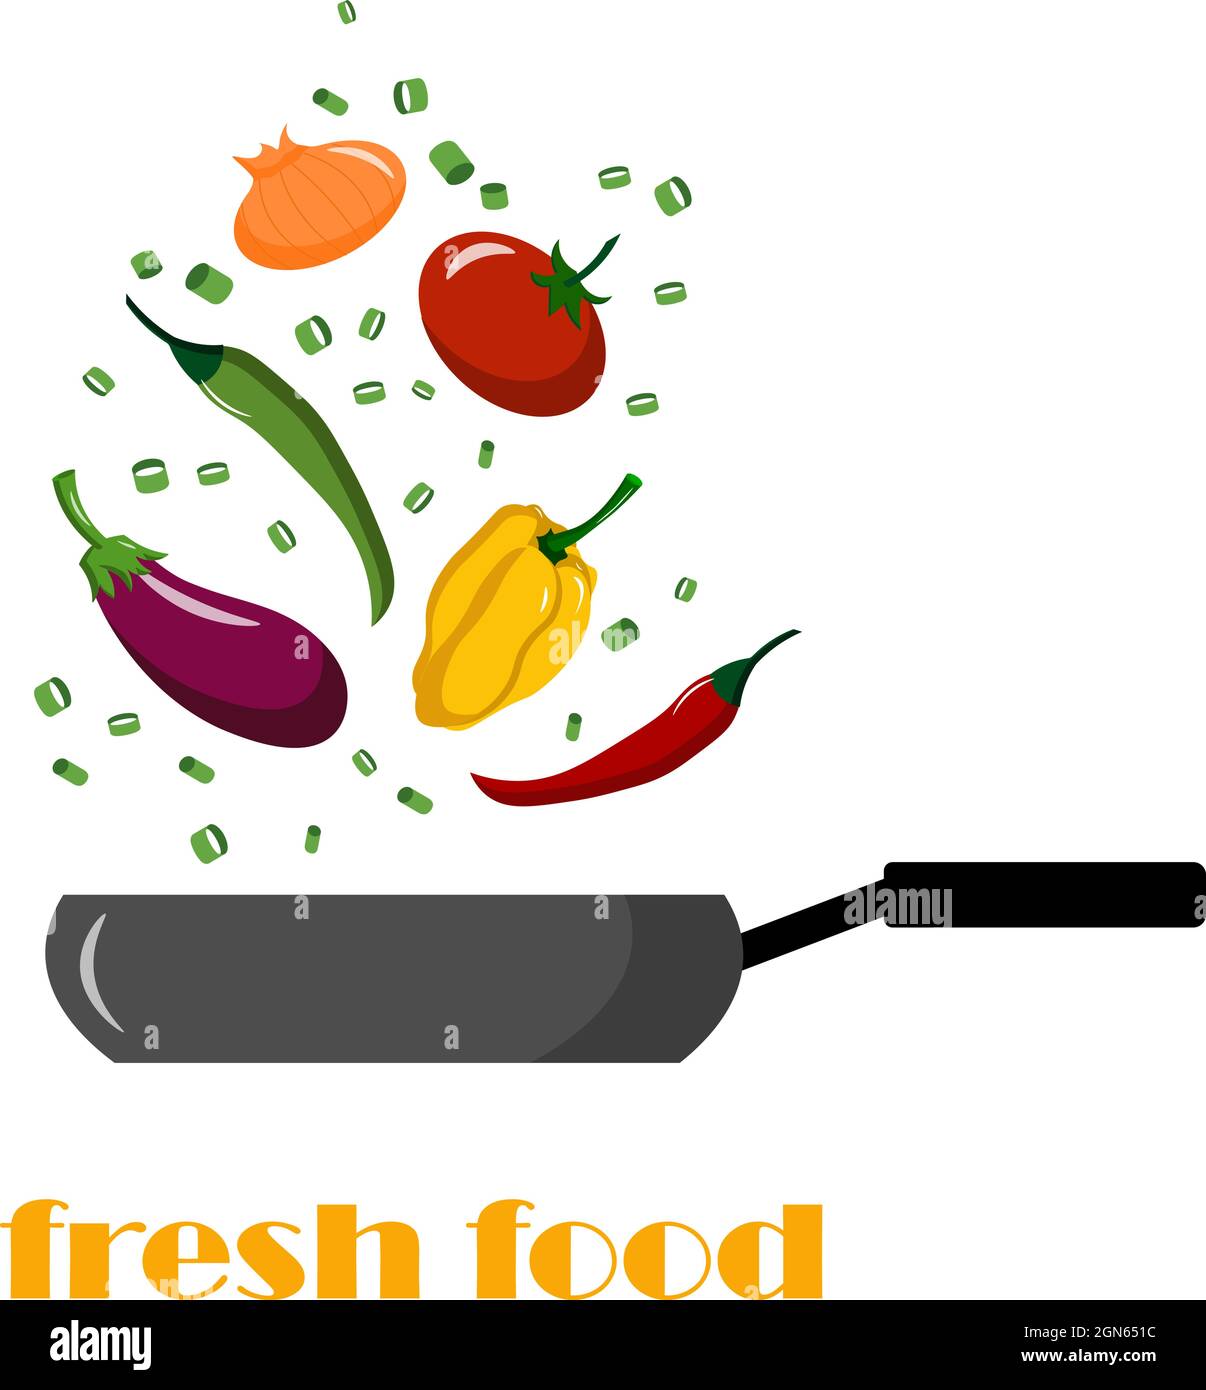 Frying pan with fresh vegetables - eggplant, green onion and tomato, pepper. Vector illustration on a white background with text.  Stock Vector